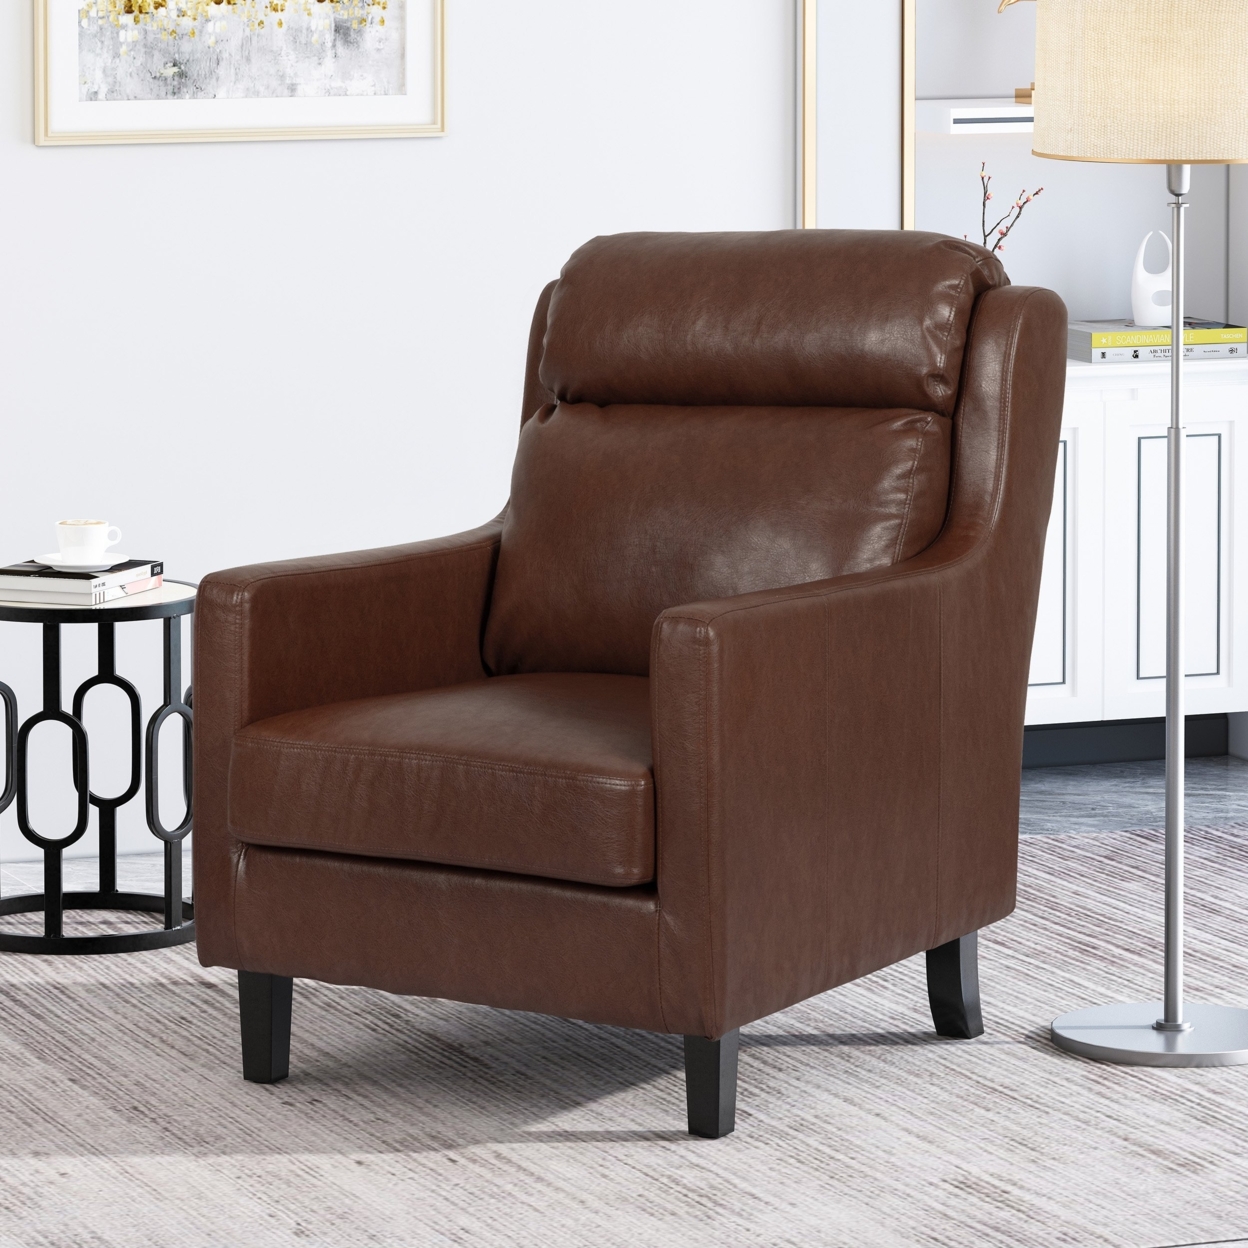 Baden Contemporary Pillow Tufted Faux Leather Club Chair - Dark Brown